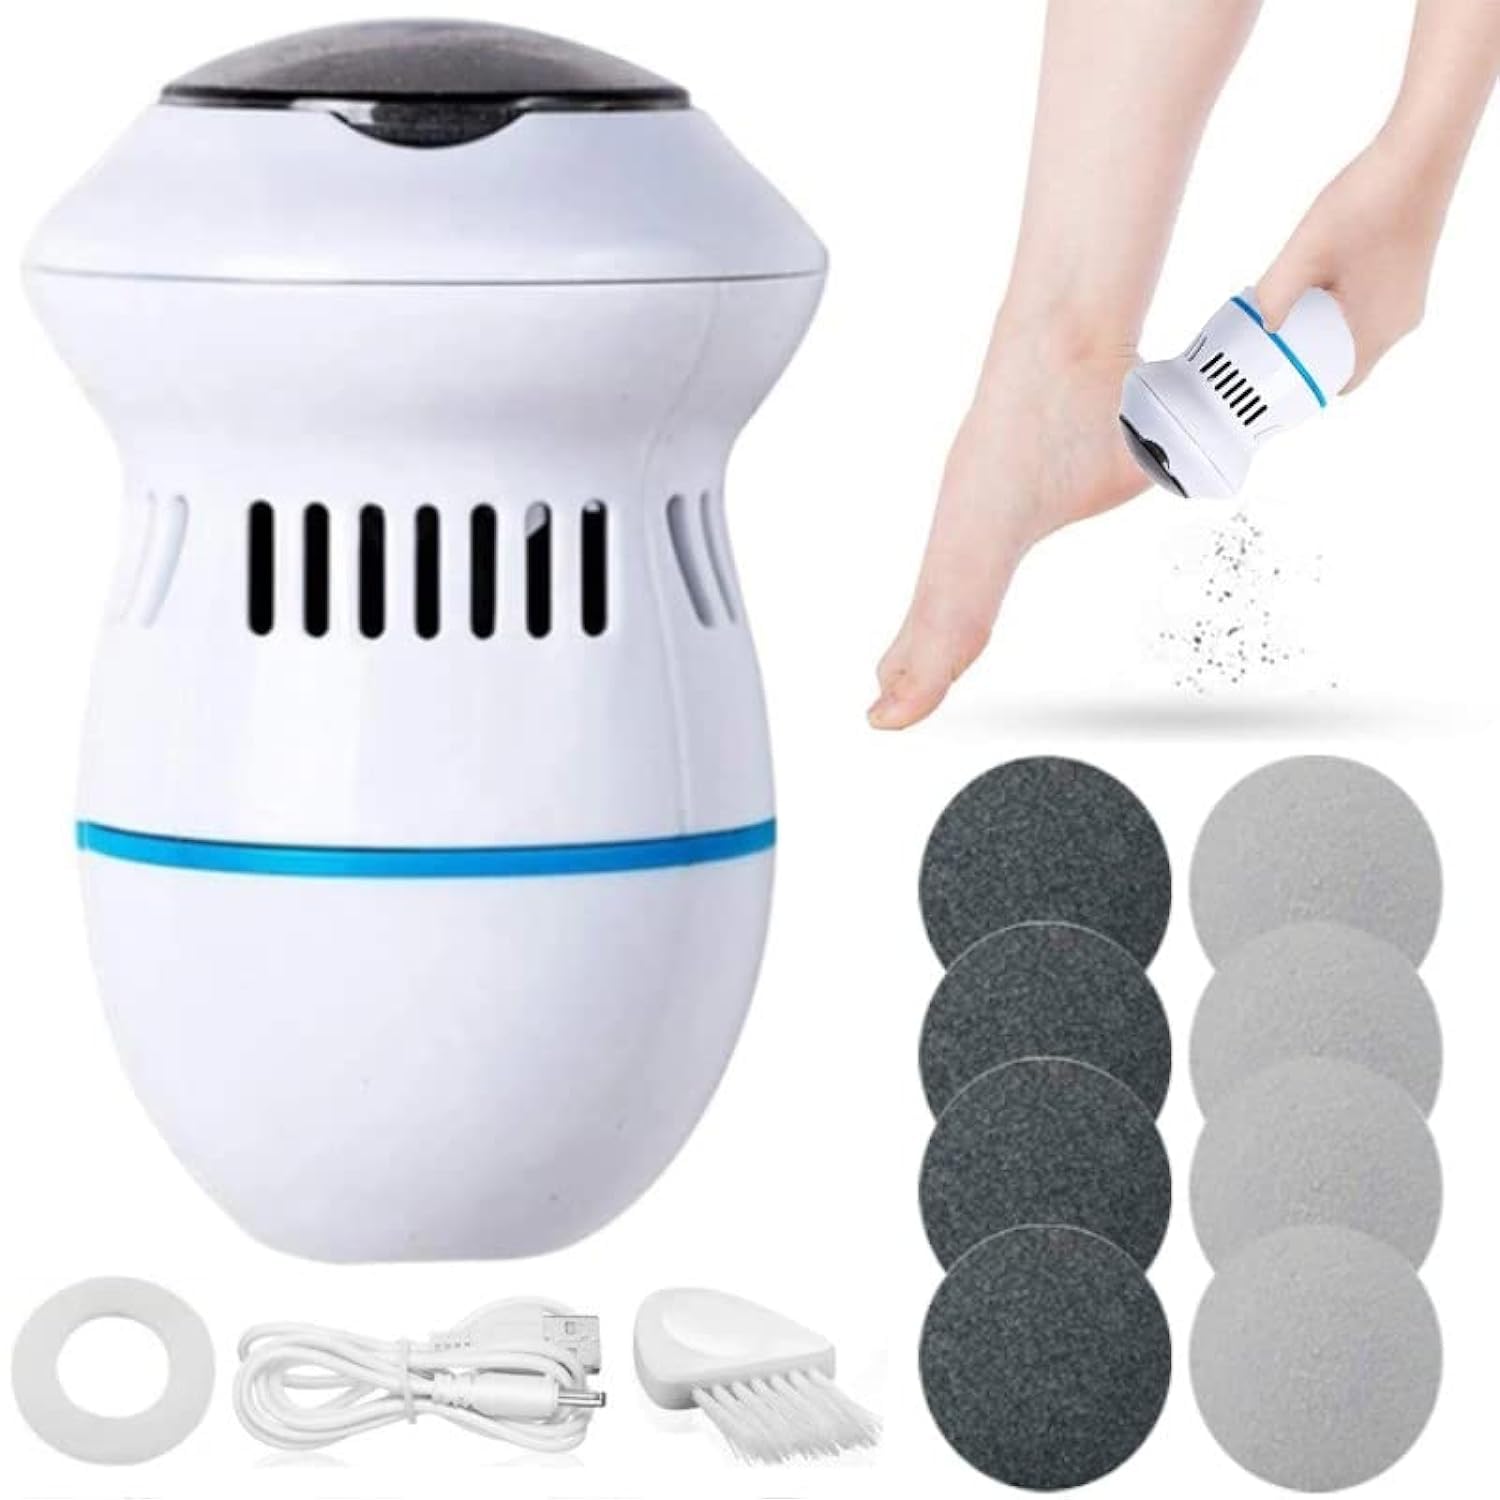 ICALODY Electric Foot Grinder,Vacuum Callus Remover,Foot Pedicure Tool,Rechargeable Foot File,Cracked Skin Cleaning Tool,White,Green